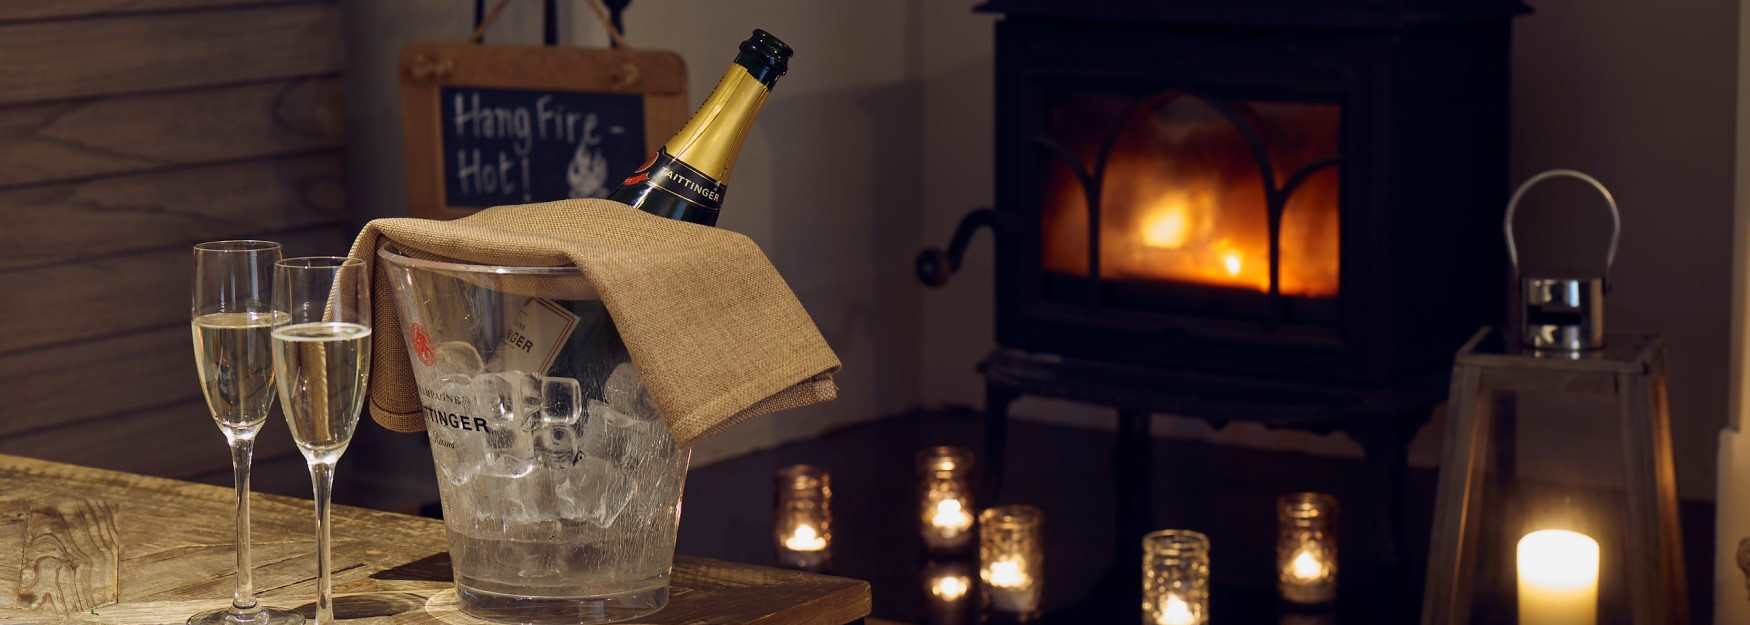 Champagne and candles in front of a log fire at The Painswick